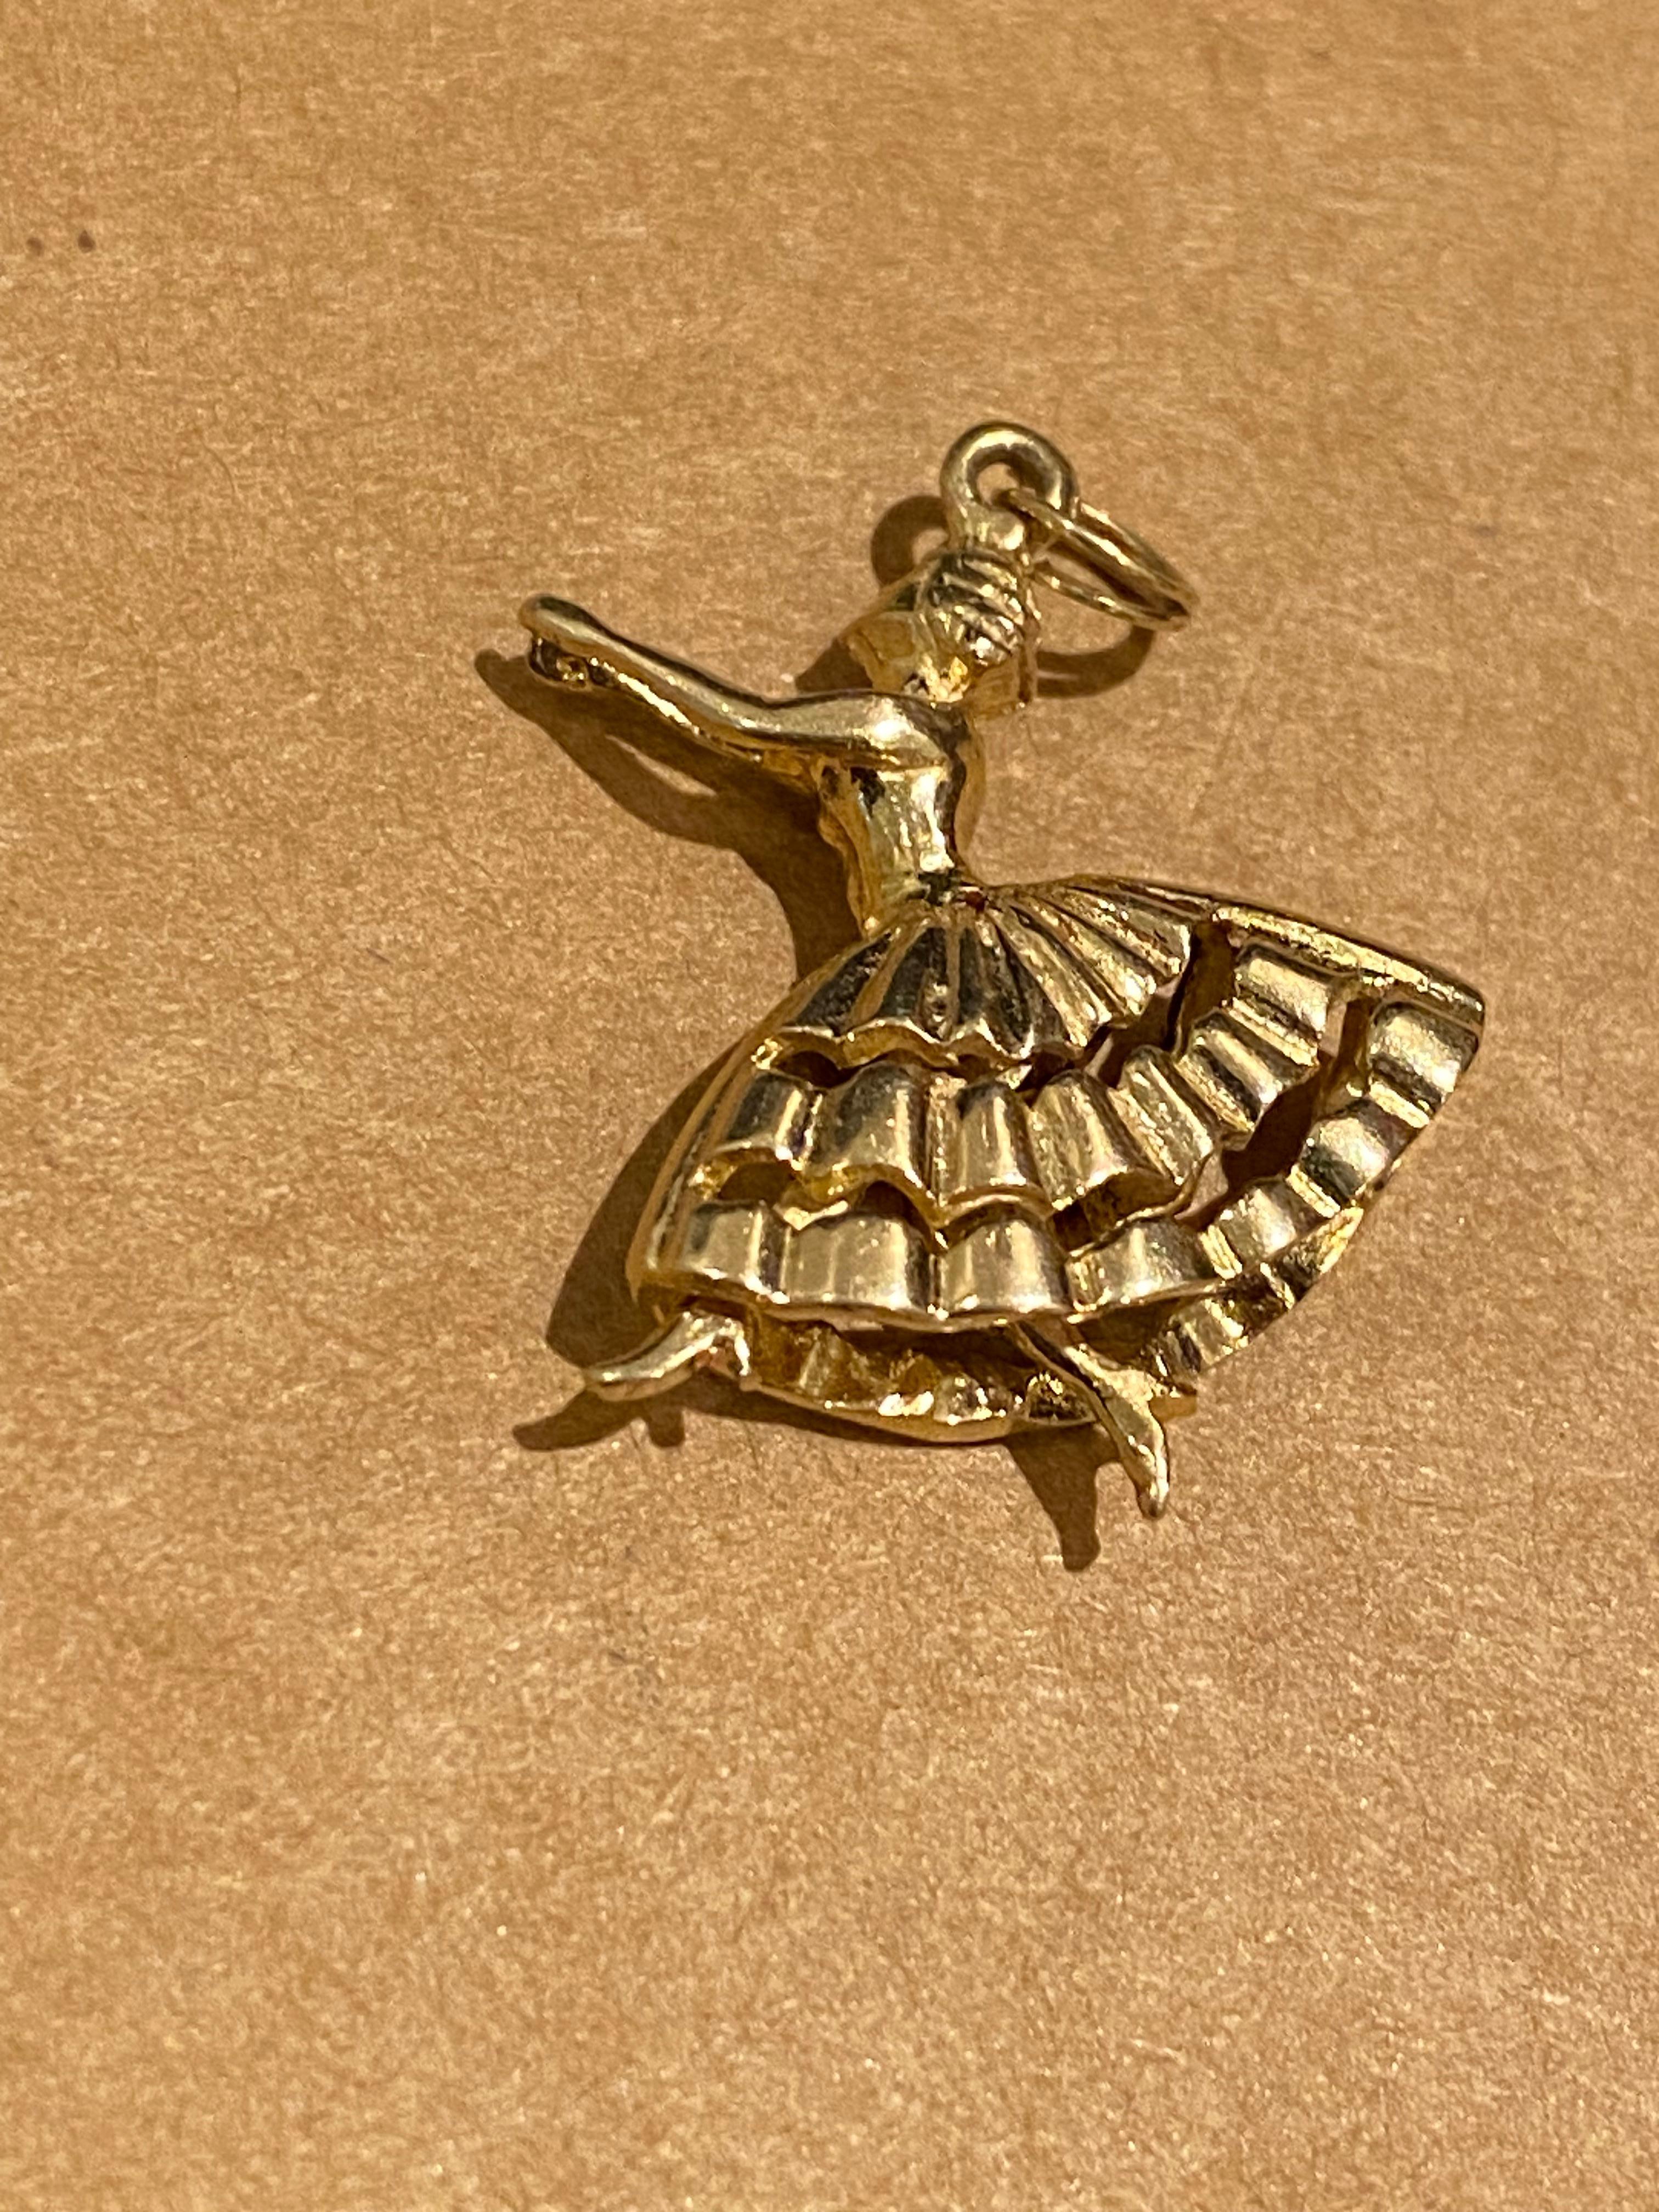 Women's Superb 9K Yellow Gold Dancer / Ballerina with Moving Legs Charm. England, c1961. For Sale